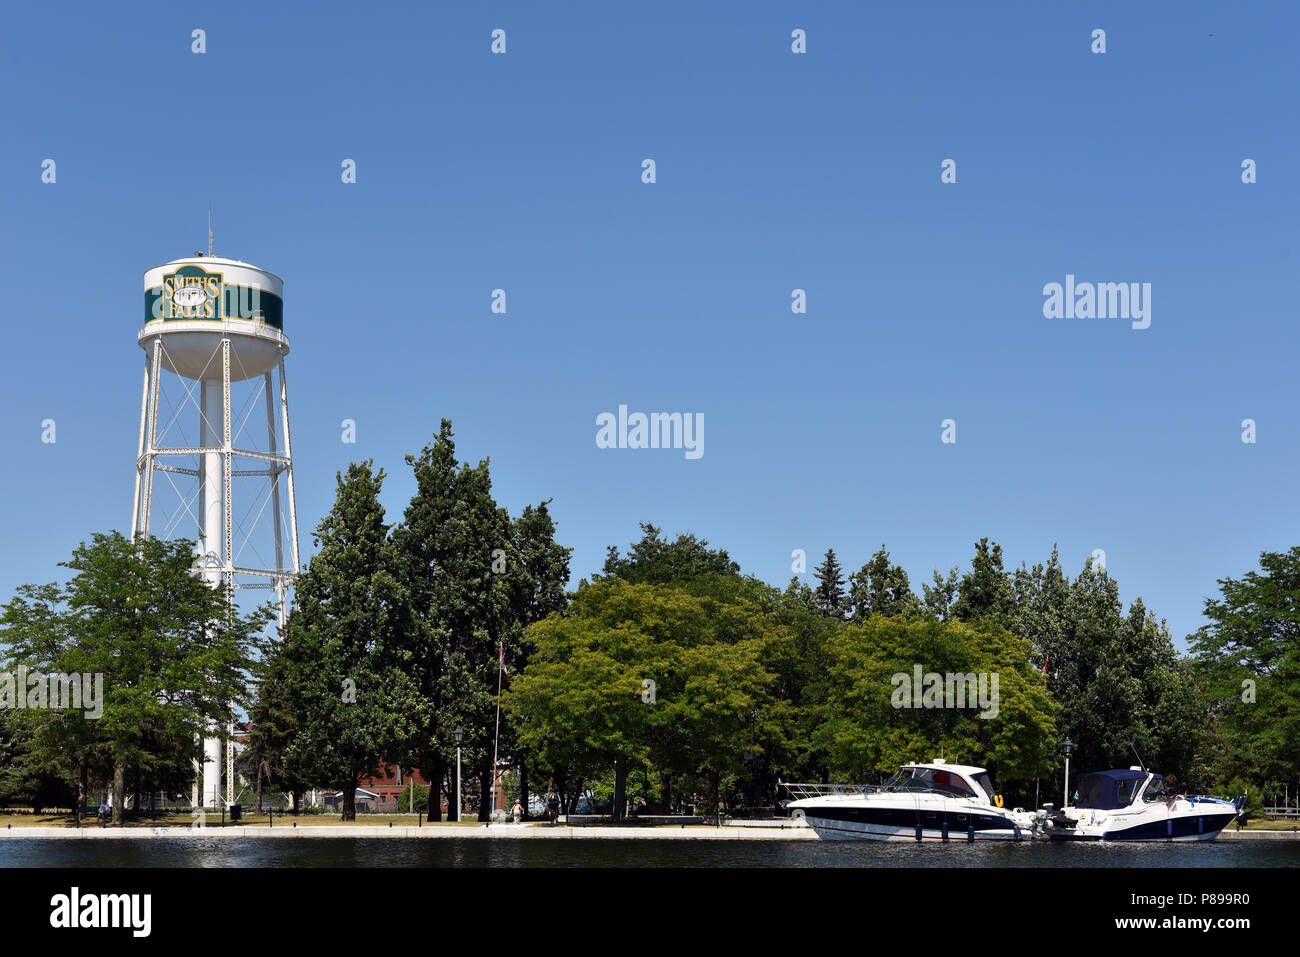 Smiths Falls, ON, Canada - July 8, 2018:  The town of Smiths Falls with its Water Tower on the Rideau River is experiencing an economic recovery due t Stock Photo